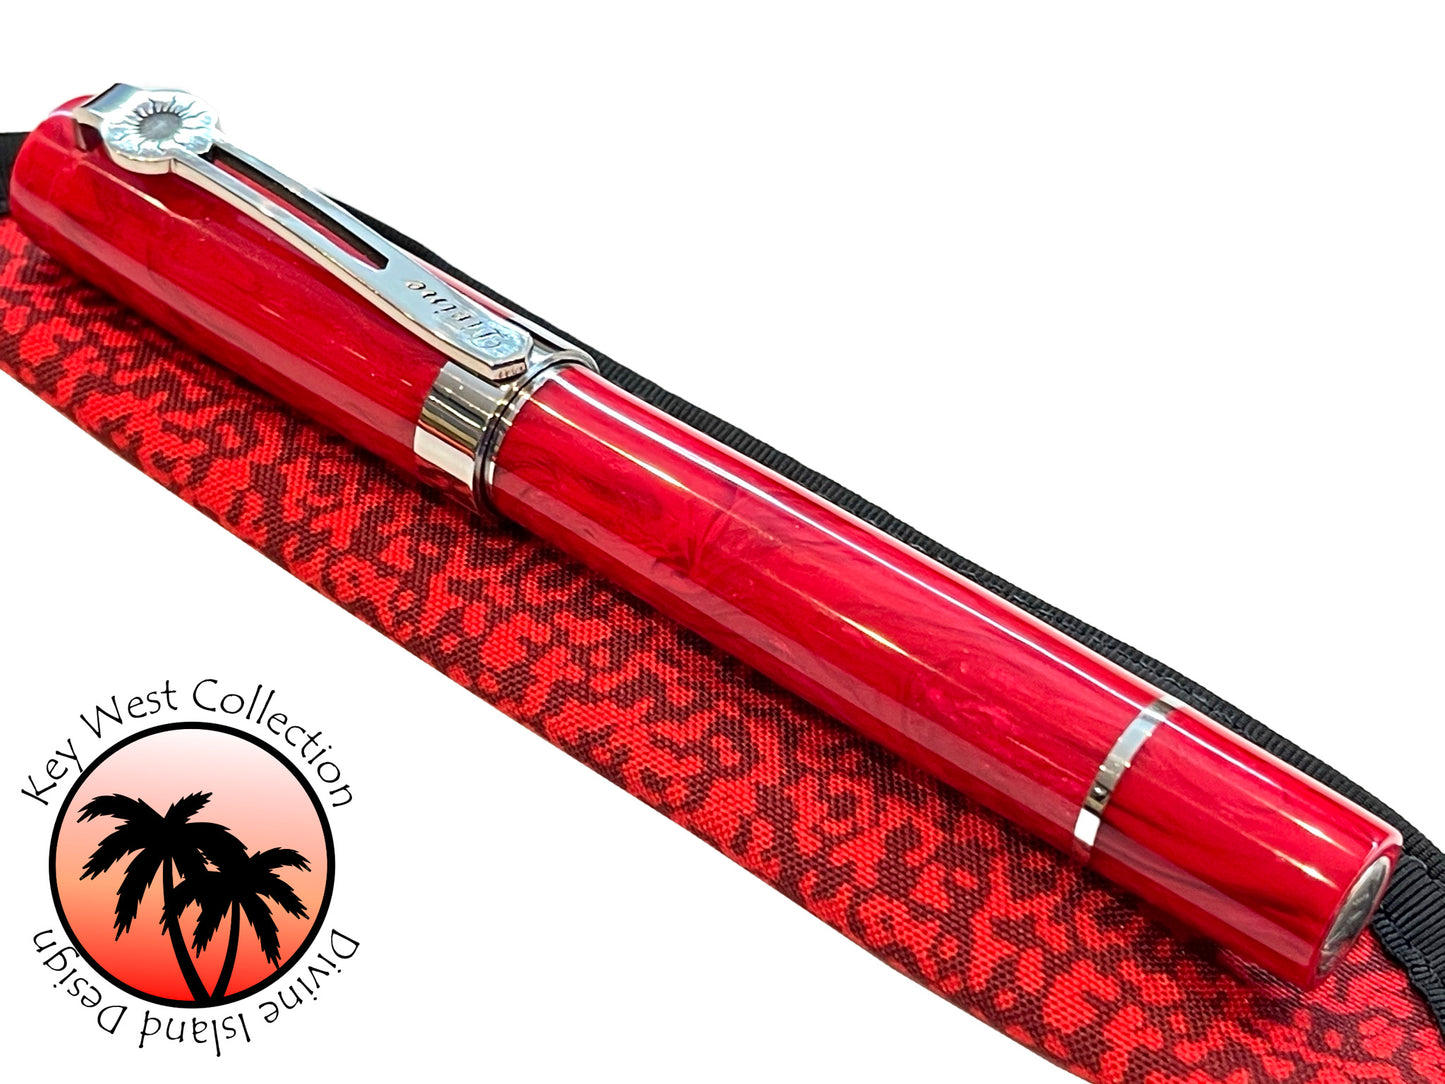 Key West Collection - "Poinciana"